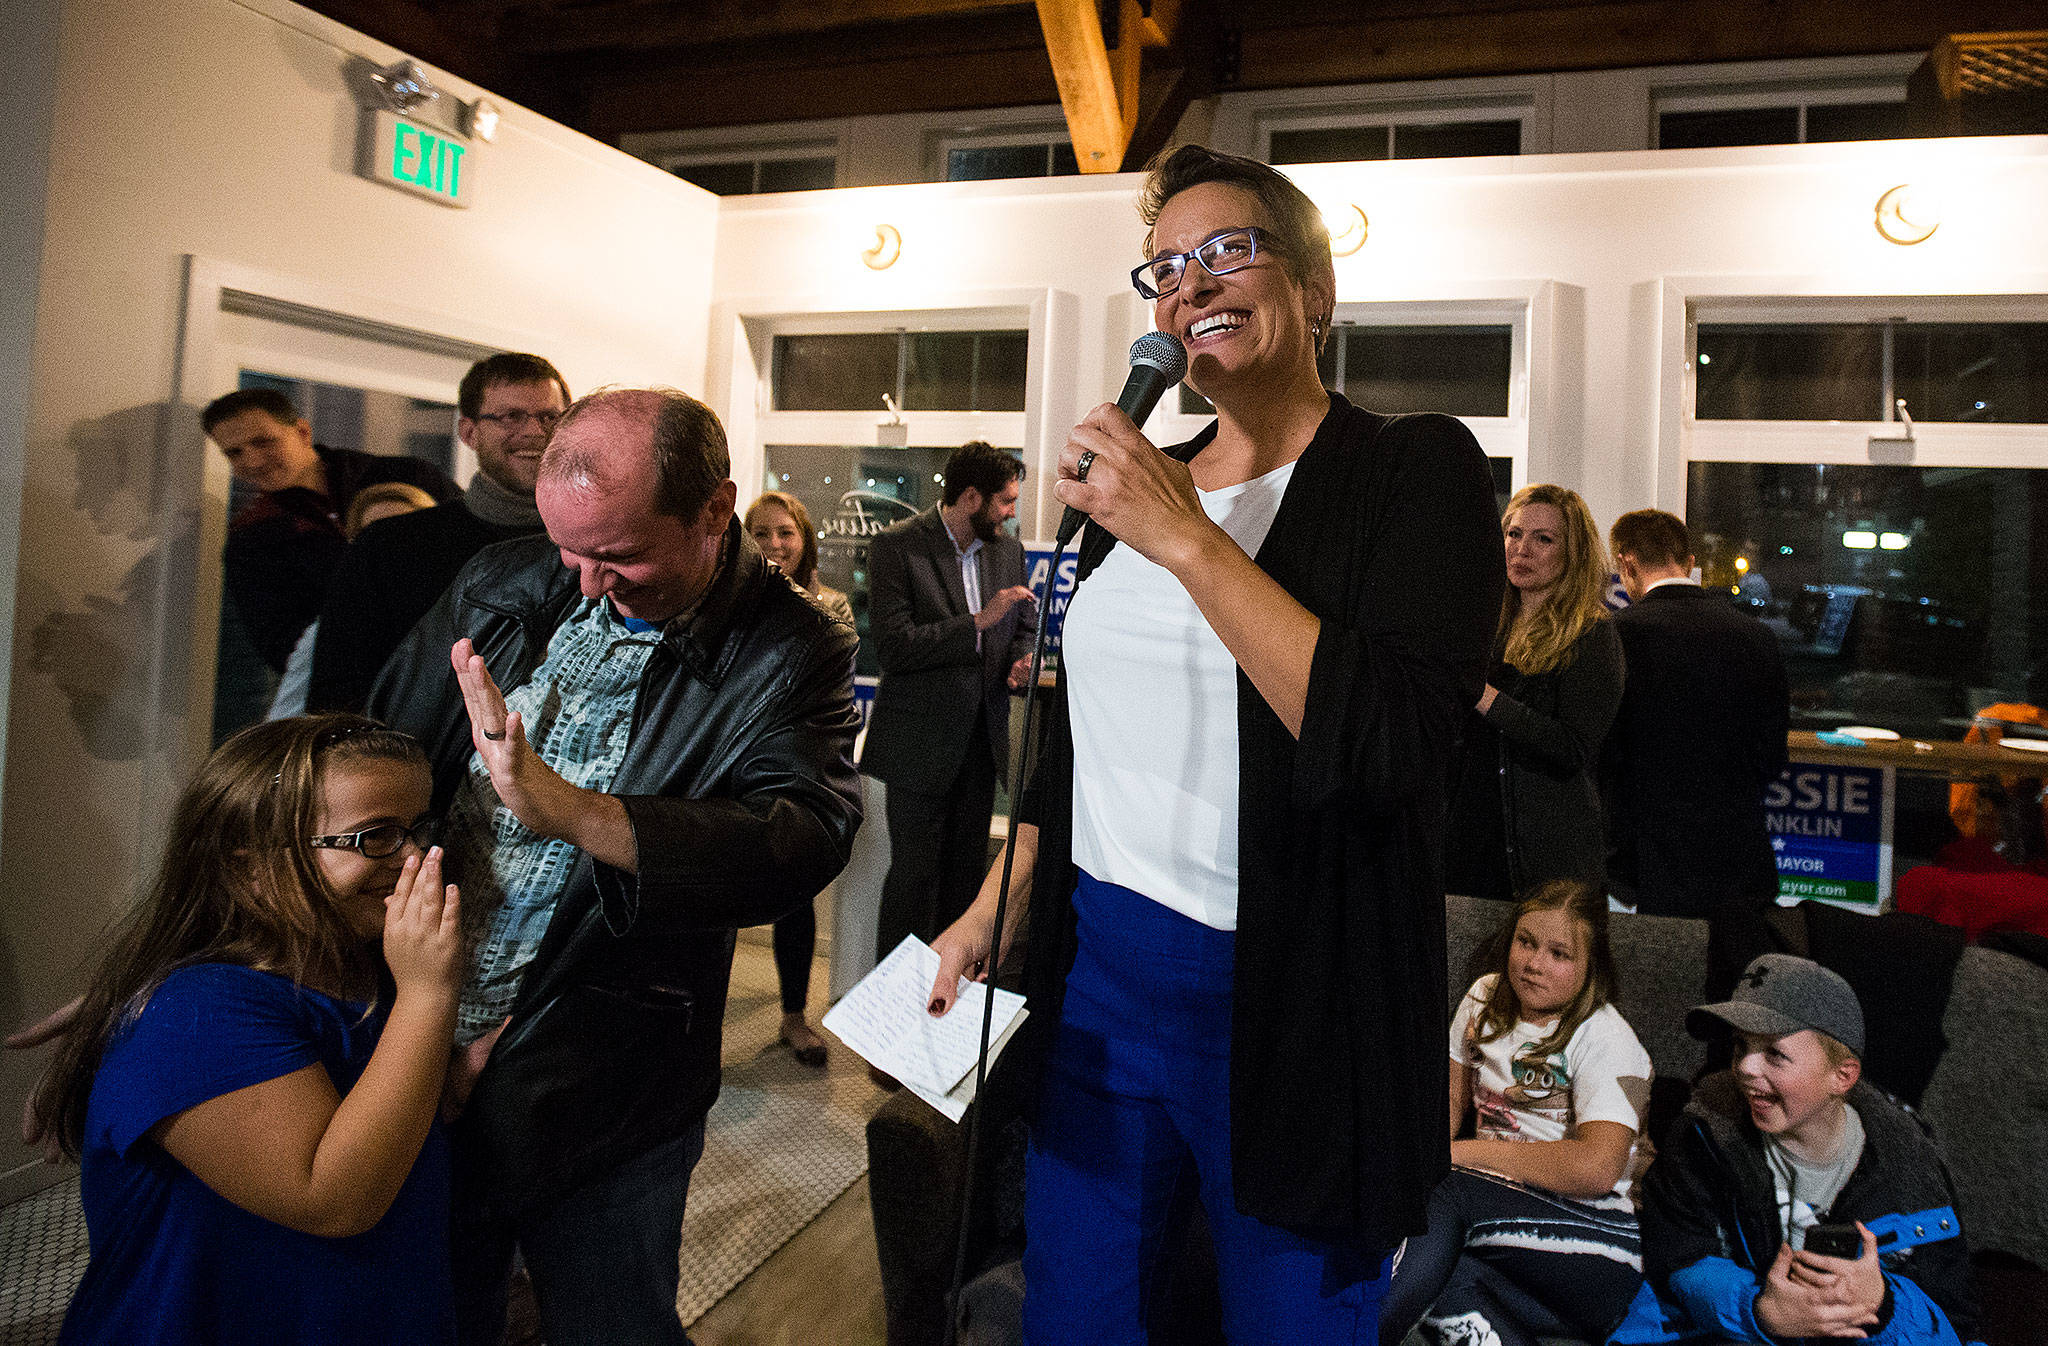 Everett mayoral candidate Cassie Franklin thanks supporters on election night. When all the votes were counted, she became the first woman elected mayor in Everett. (Andy Bronson / The Herald)